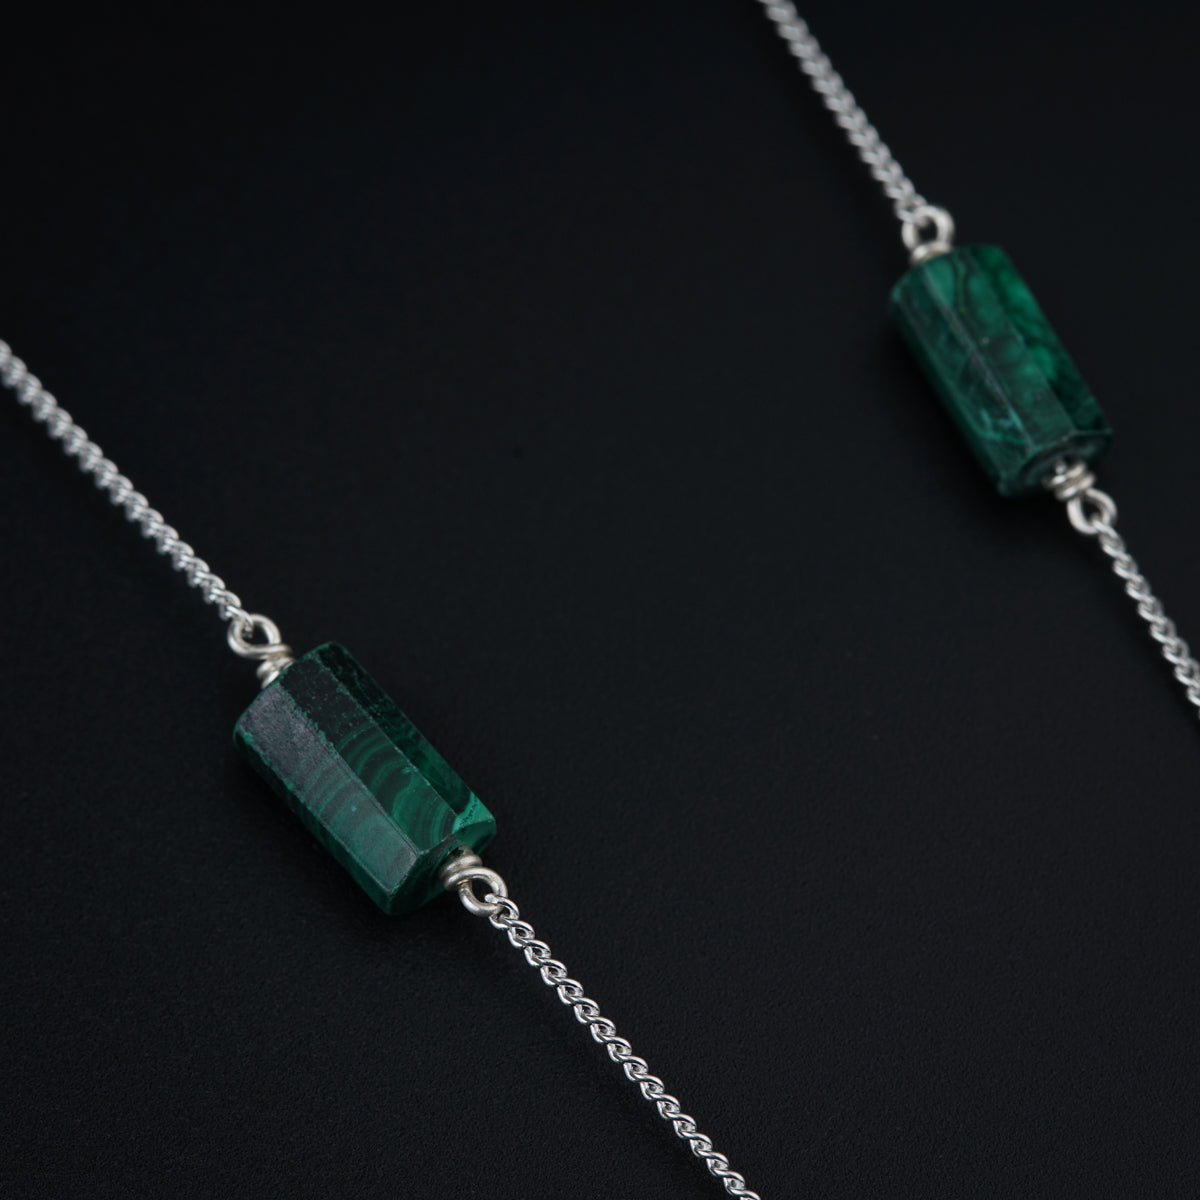 Antique Silver Necklace with Malachite Stones